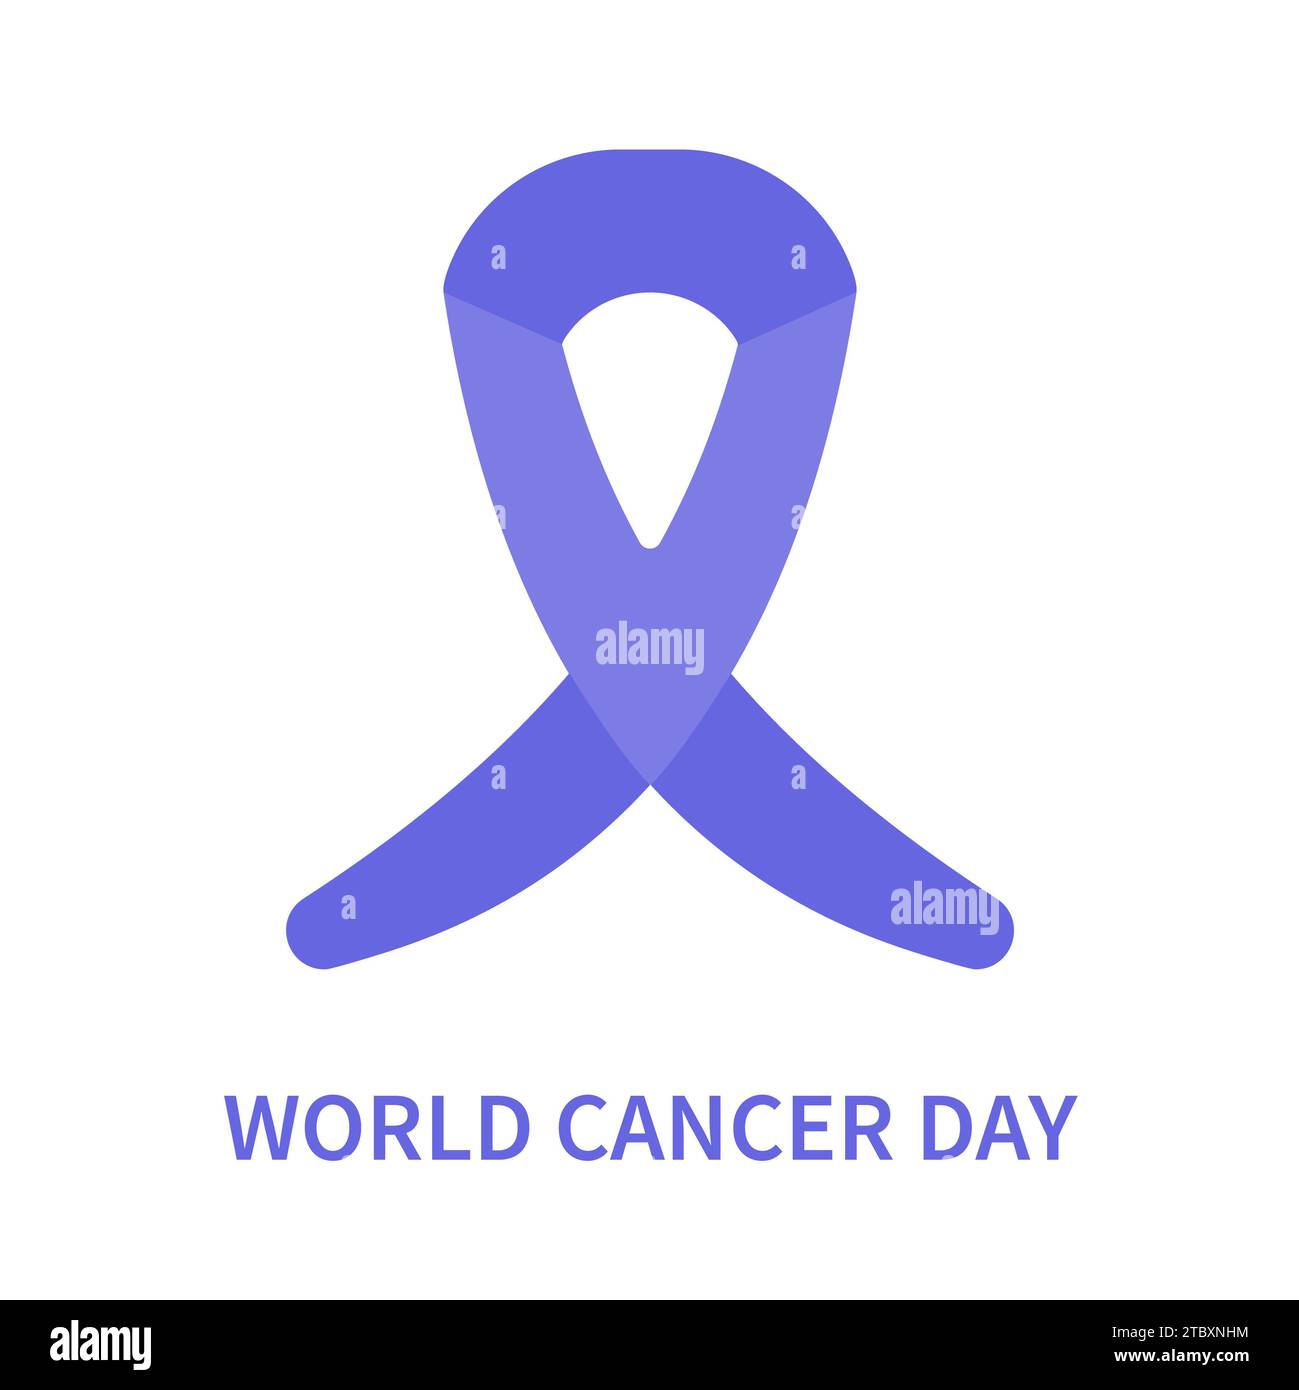 World cancer day, conceptual illustration Stock Photo